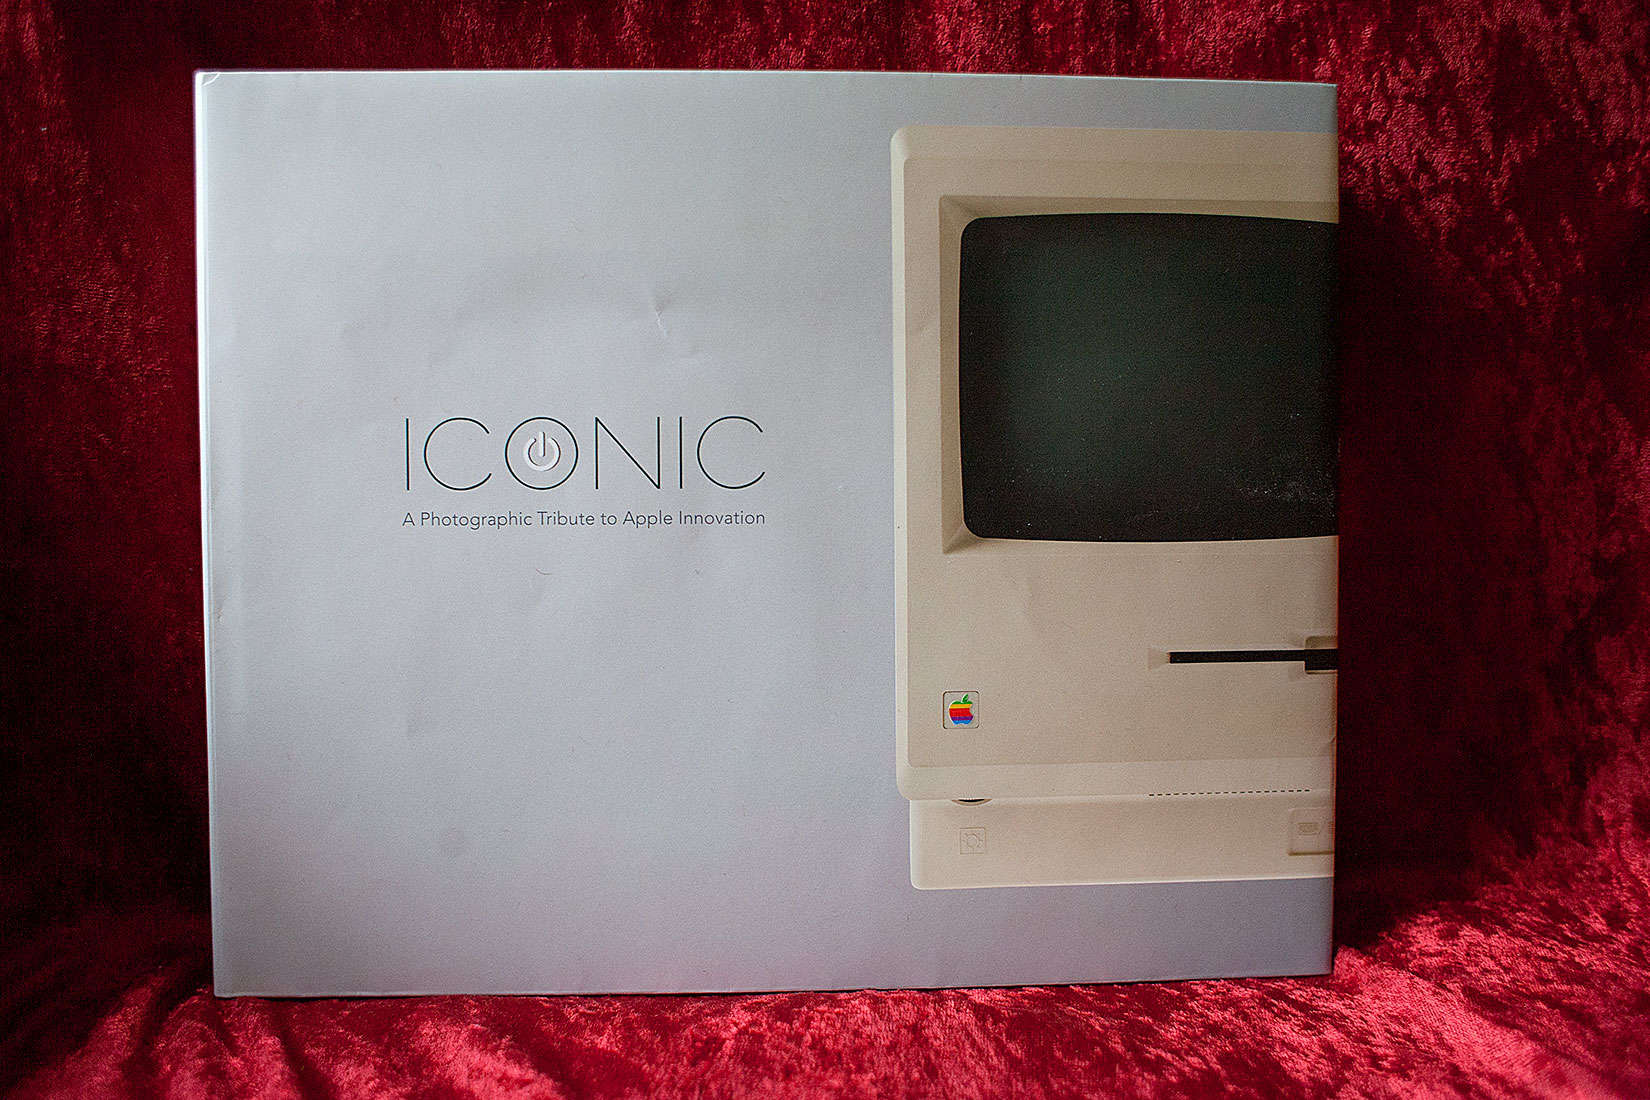 Jonathan Zufi's book ICONIC has been popular with Apple fans.